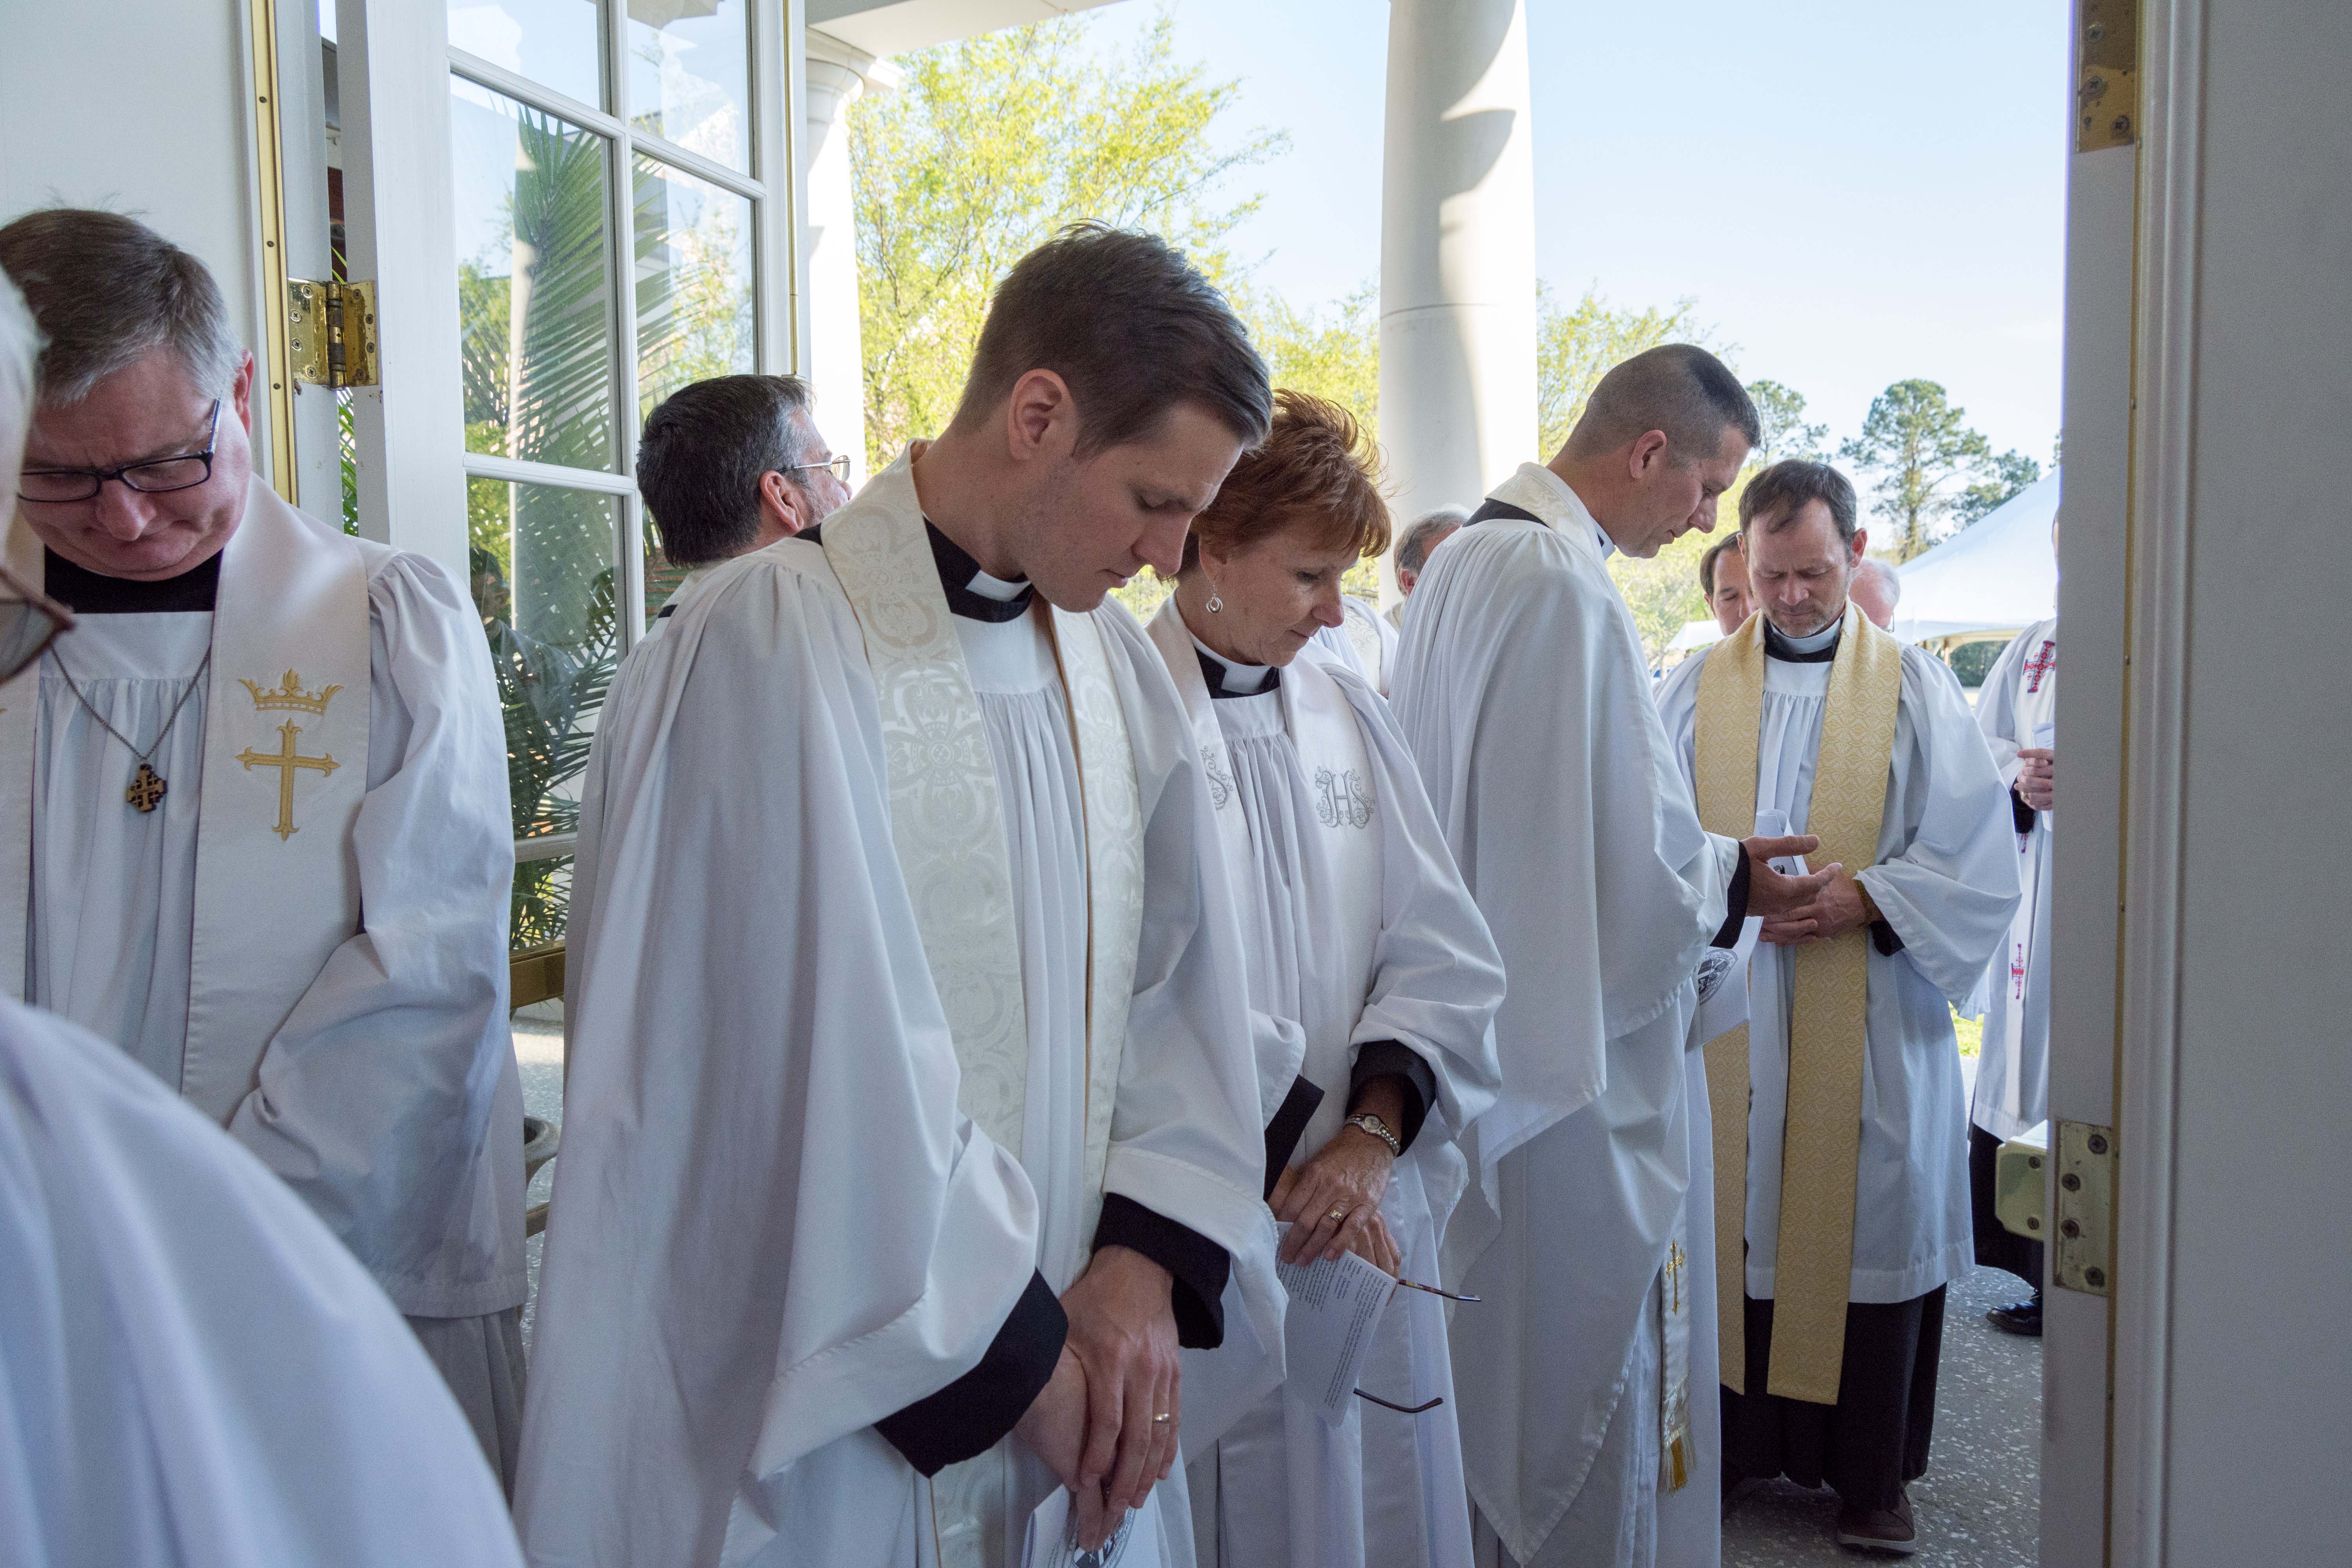 The Diocese of South Carolina hold their 227th Diocesan Convention